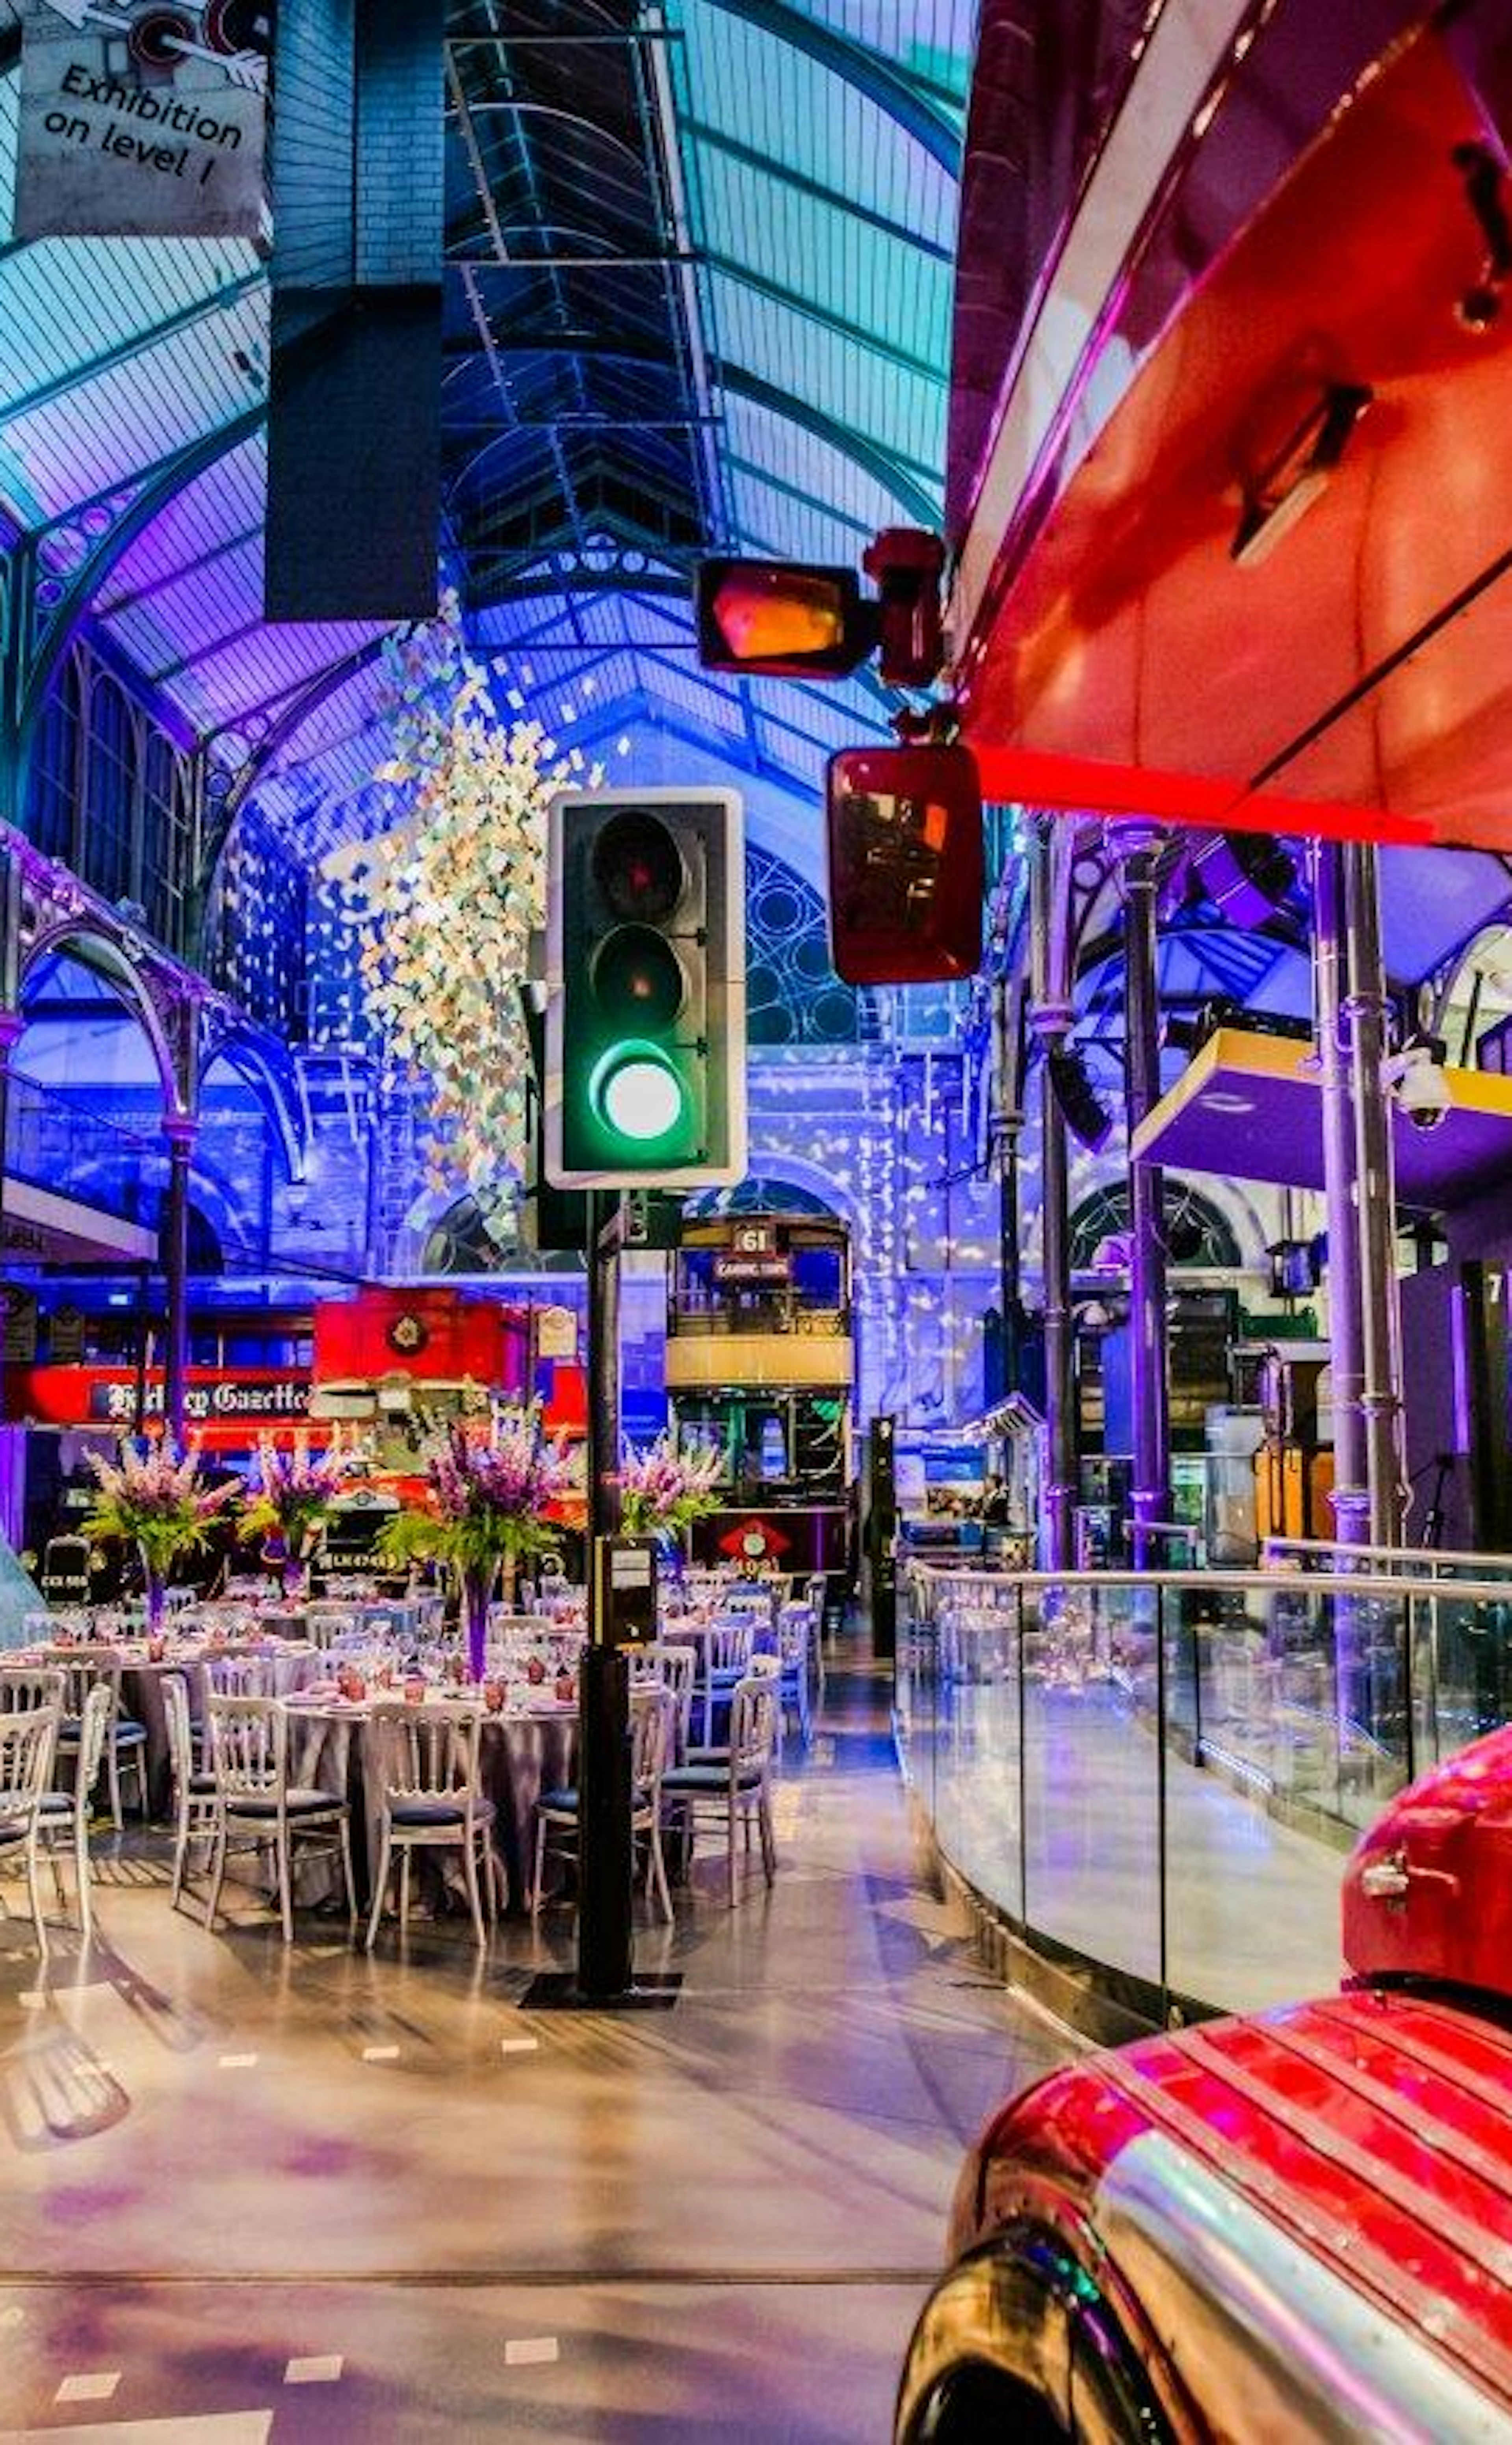 Quirky Conference venues - London Transport Museum